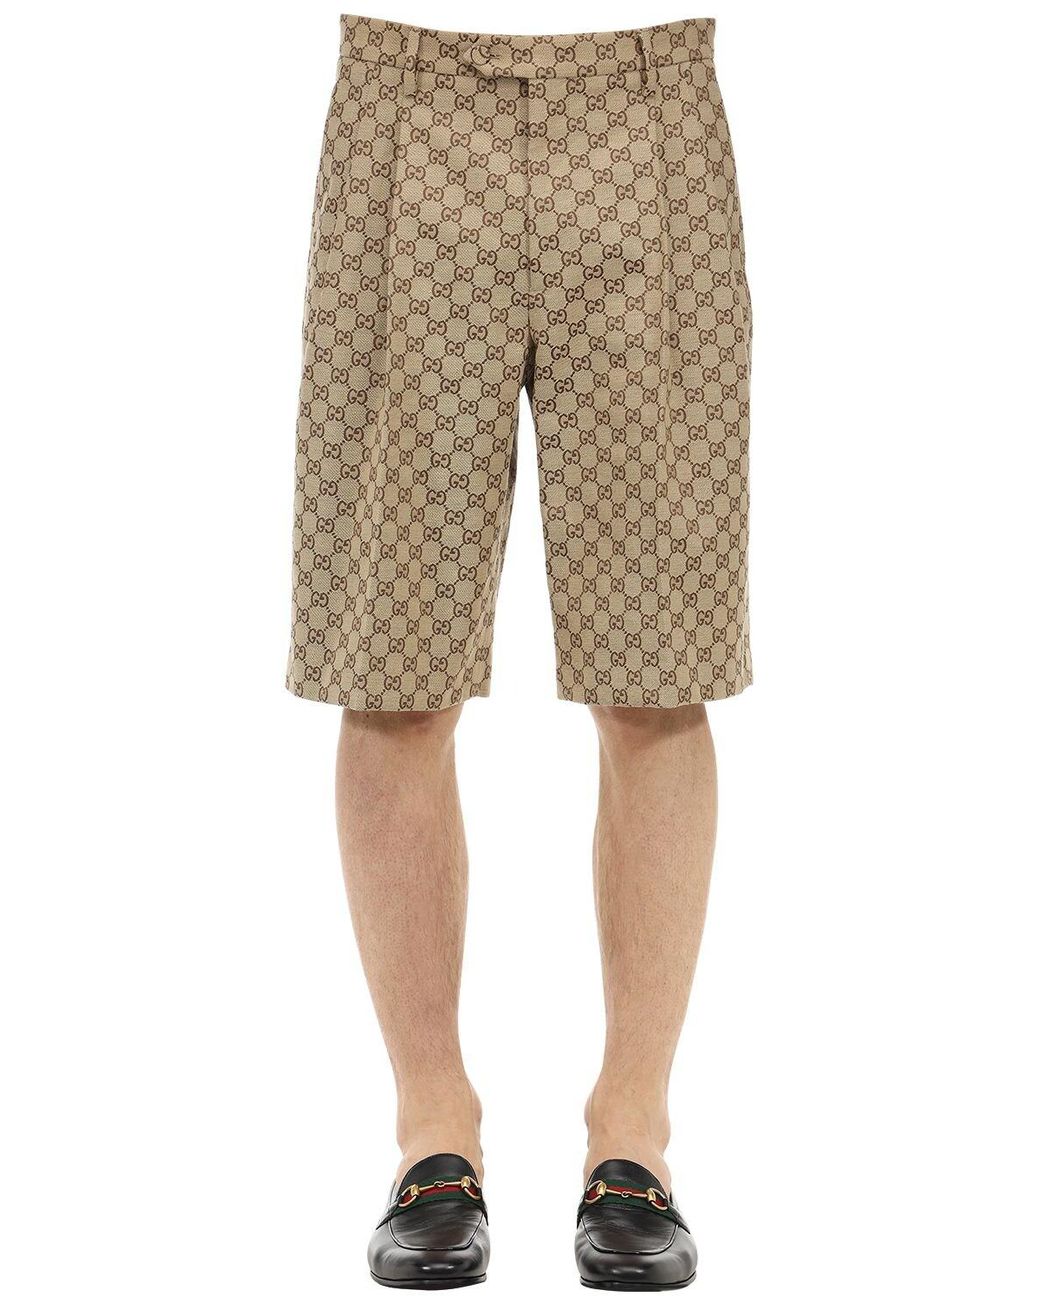 Gucci Gg Logo Cotton Canvas Shorts in Beige (Natural) for Men - Lyst